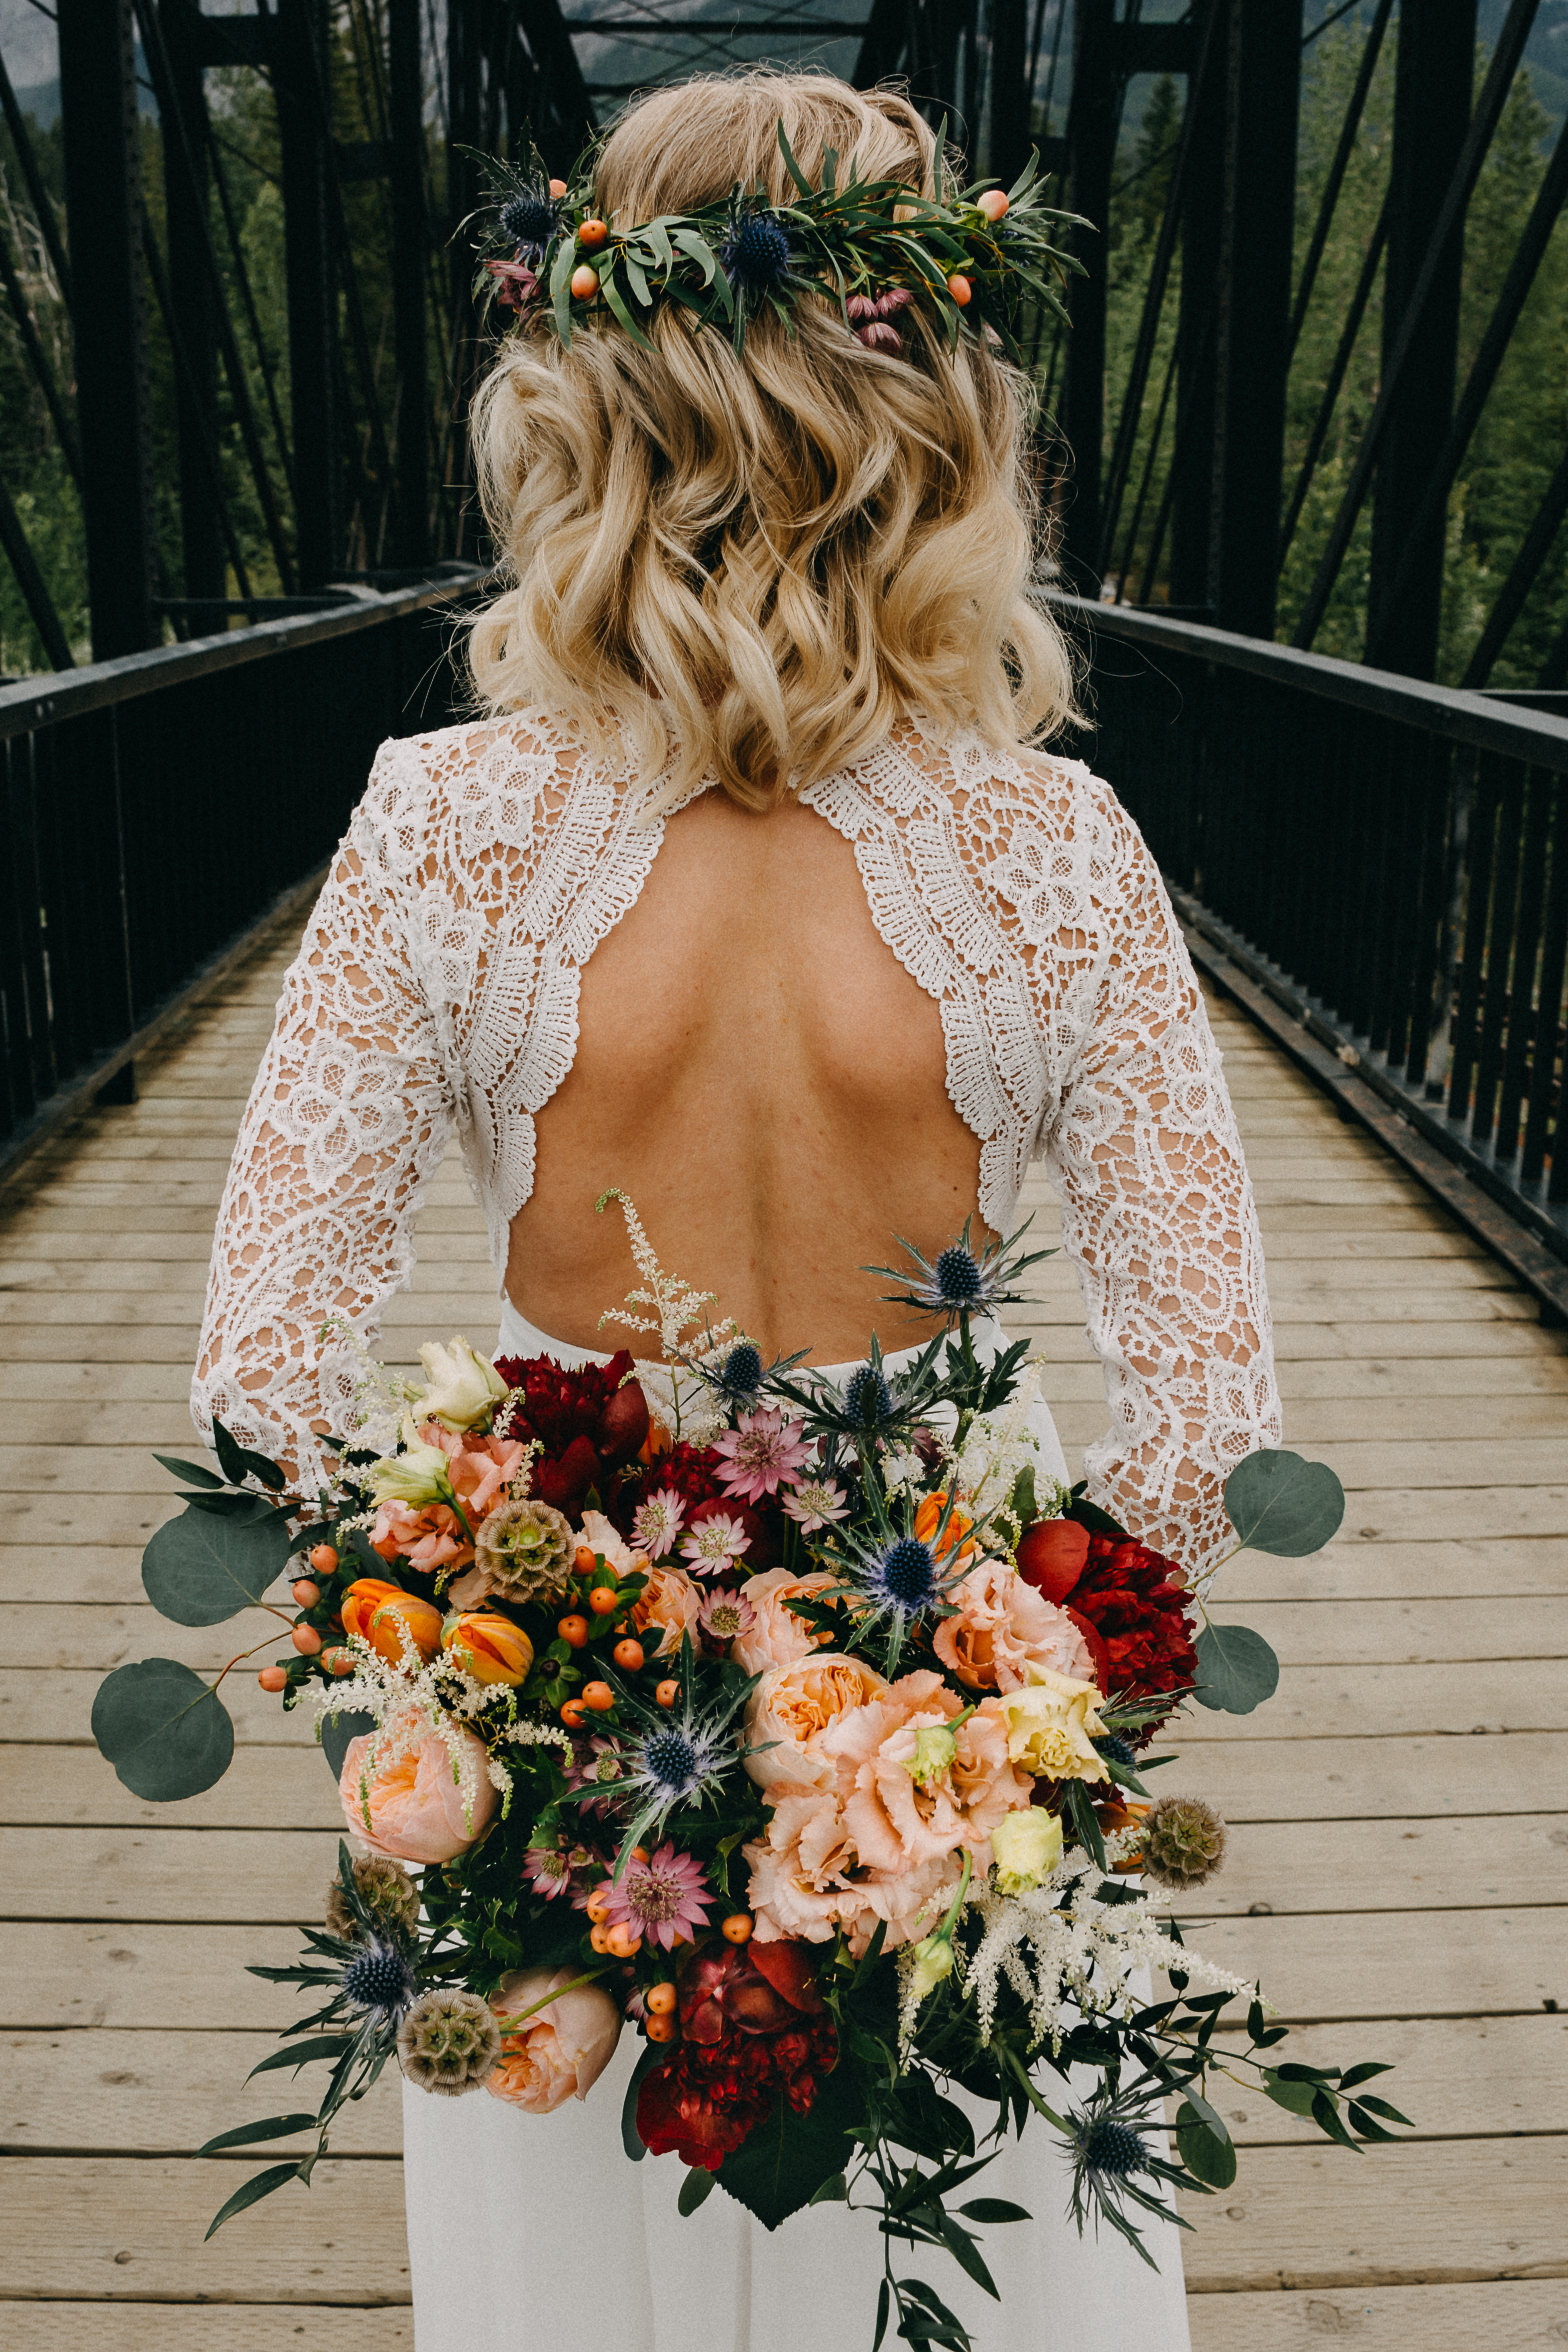 The bride holding her bouquet behind her back on the engine bridge in Canmore, Alberta